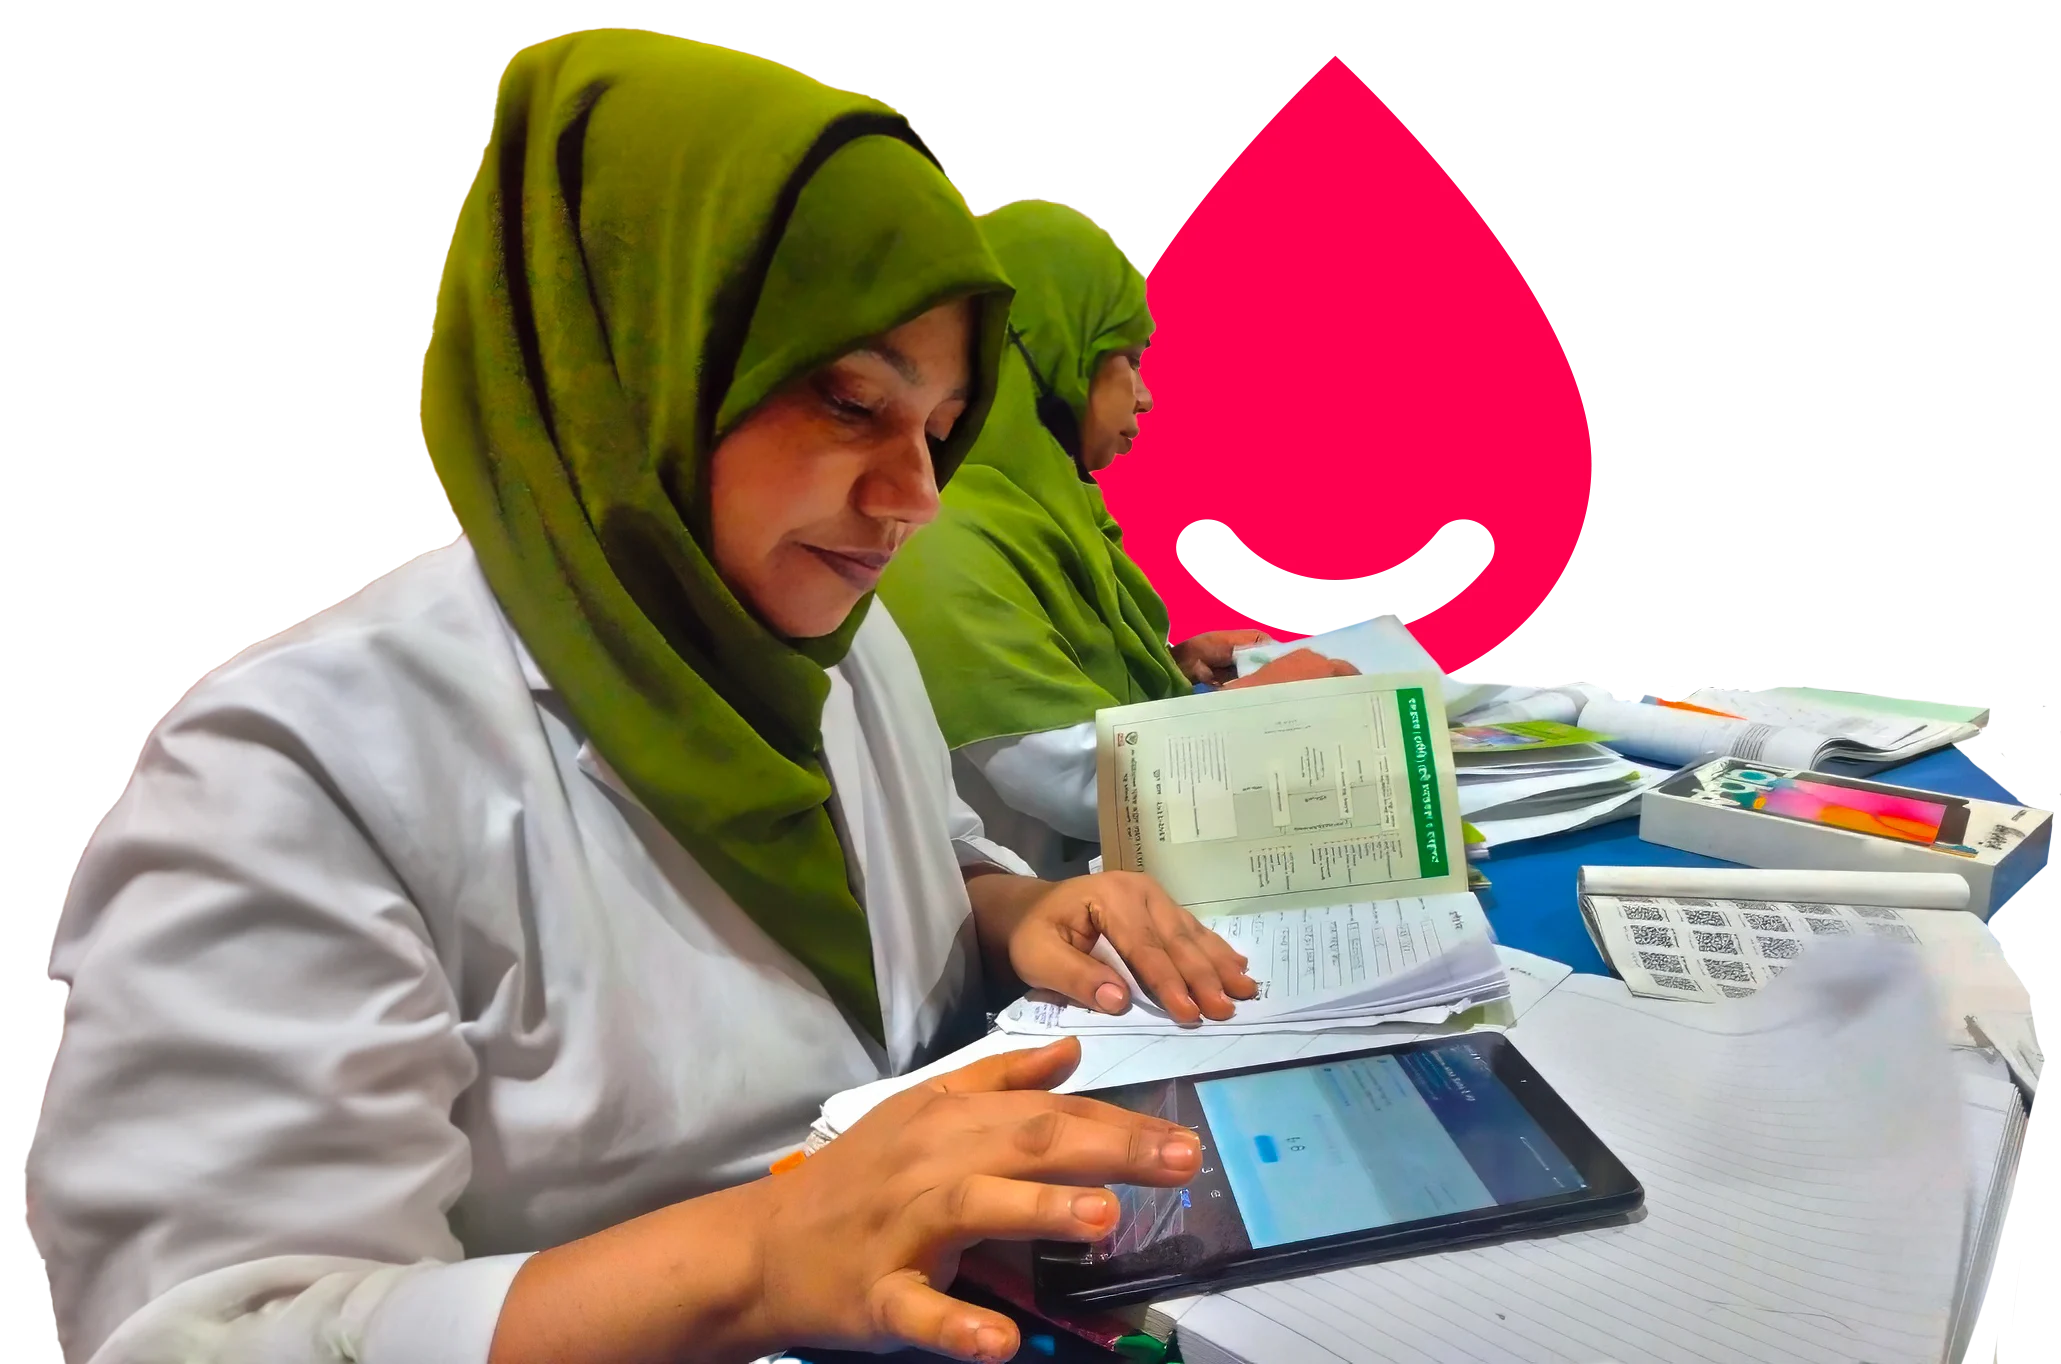 A montage of two health care workers recording blood pressure results on the Simple app, with the red blood drop logo for Simple in the background